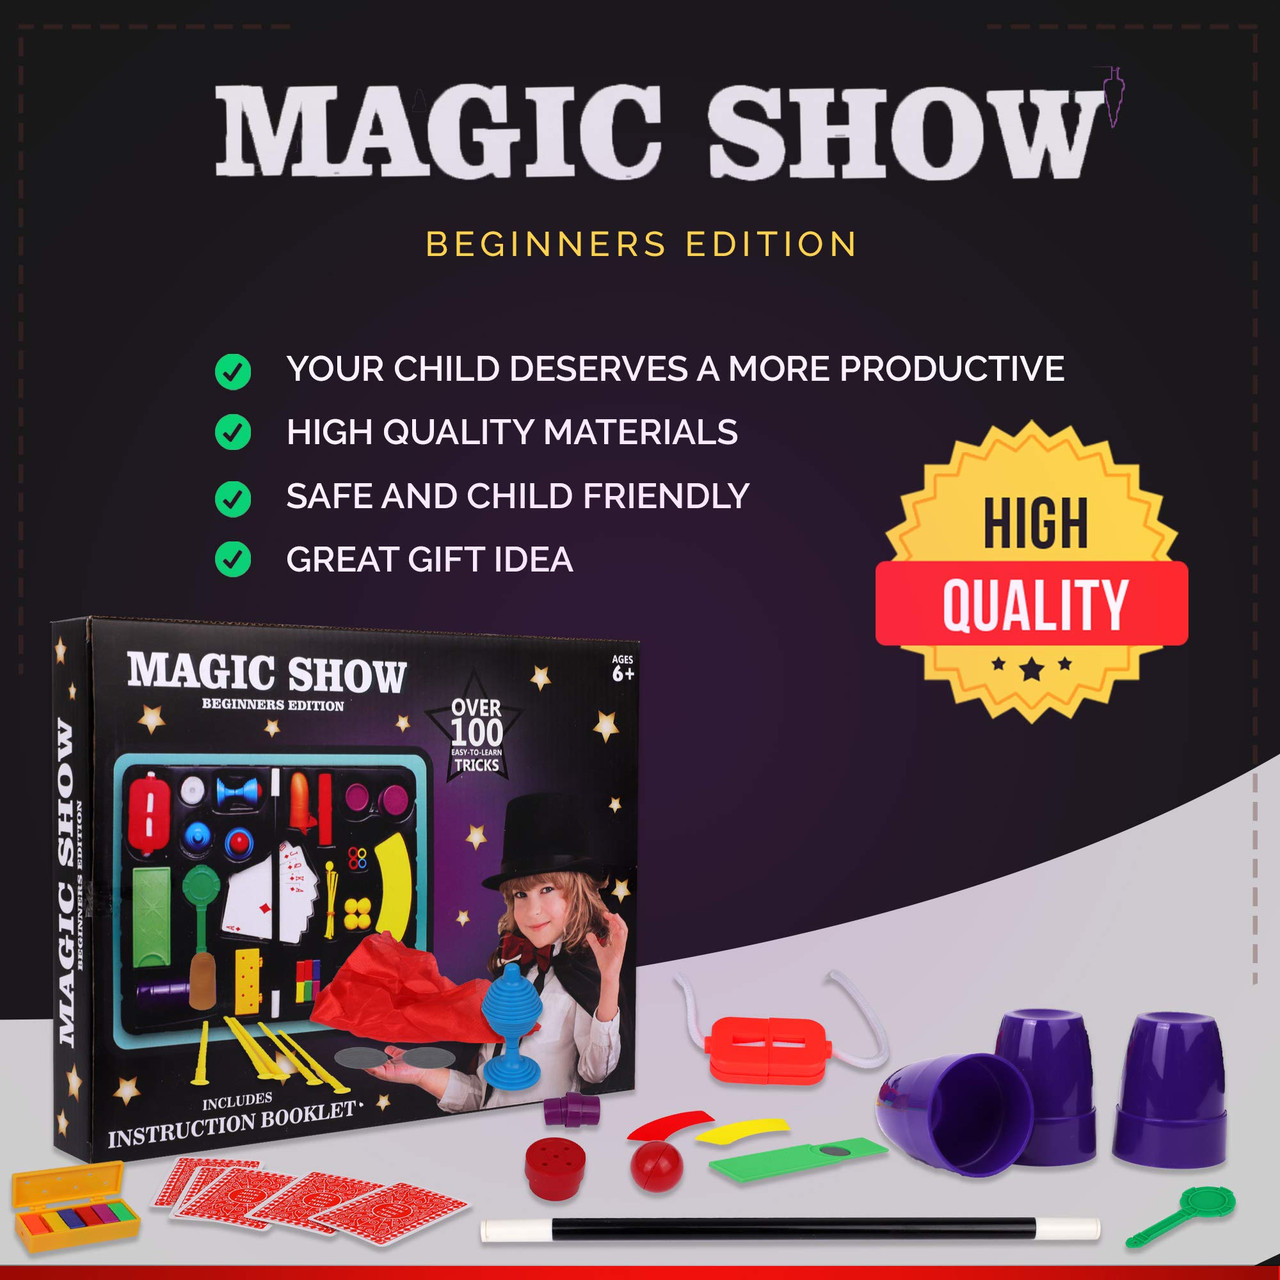 Playkidz Magic Trick for Kids Set 2- Magic Set with Over 35 Tricks Made  Simple, Magician Pretend Play Set with Wand & More Magic Tricks - Easy to